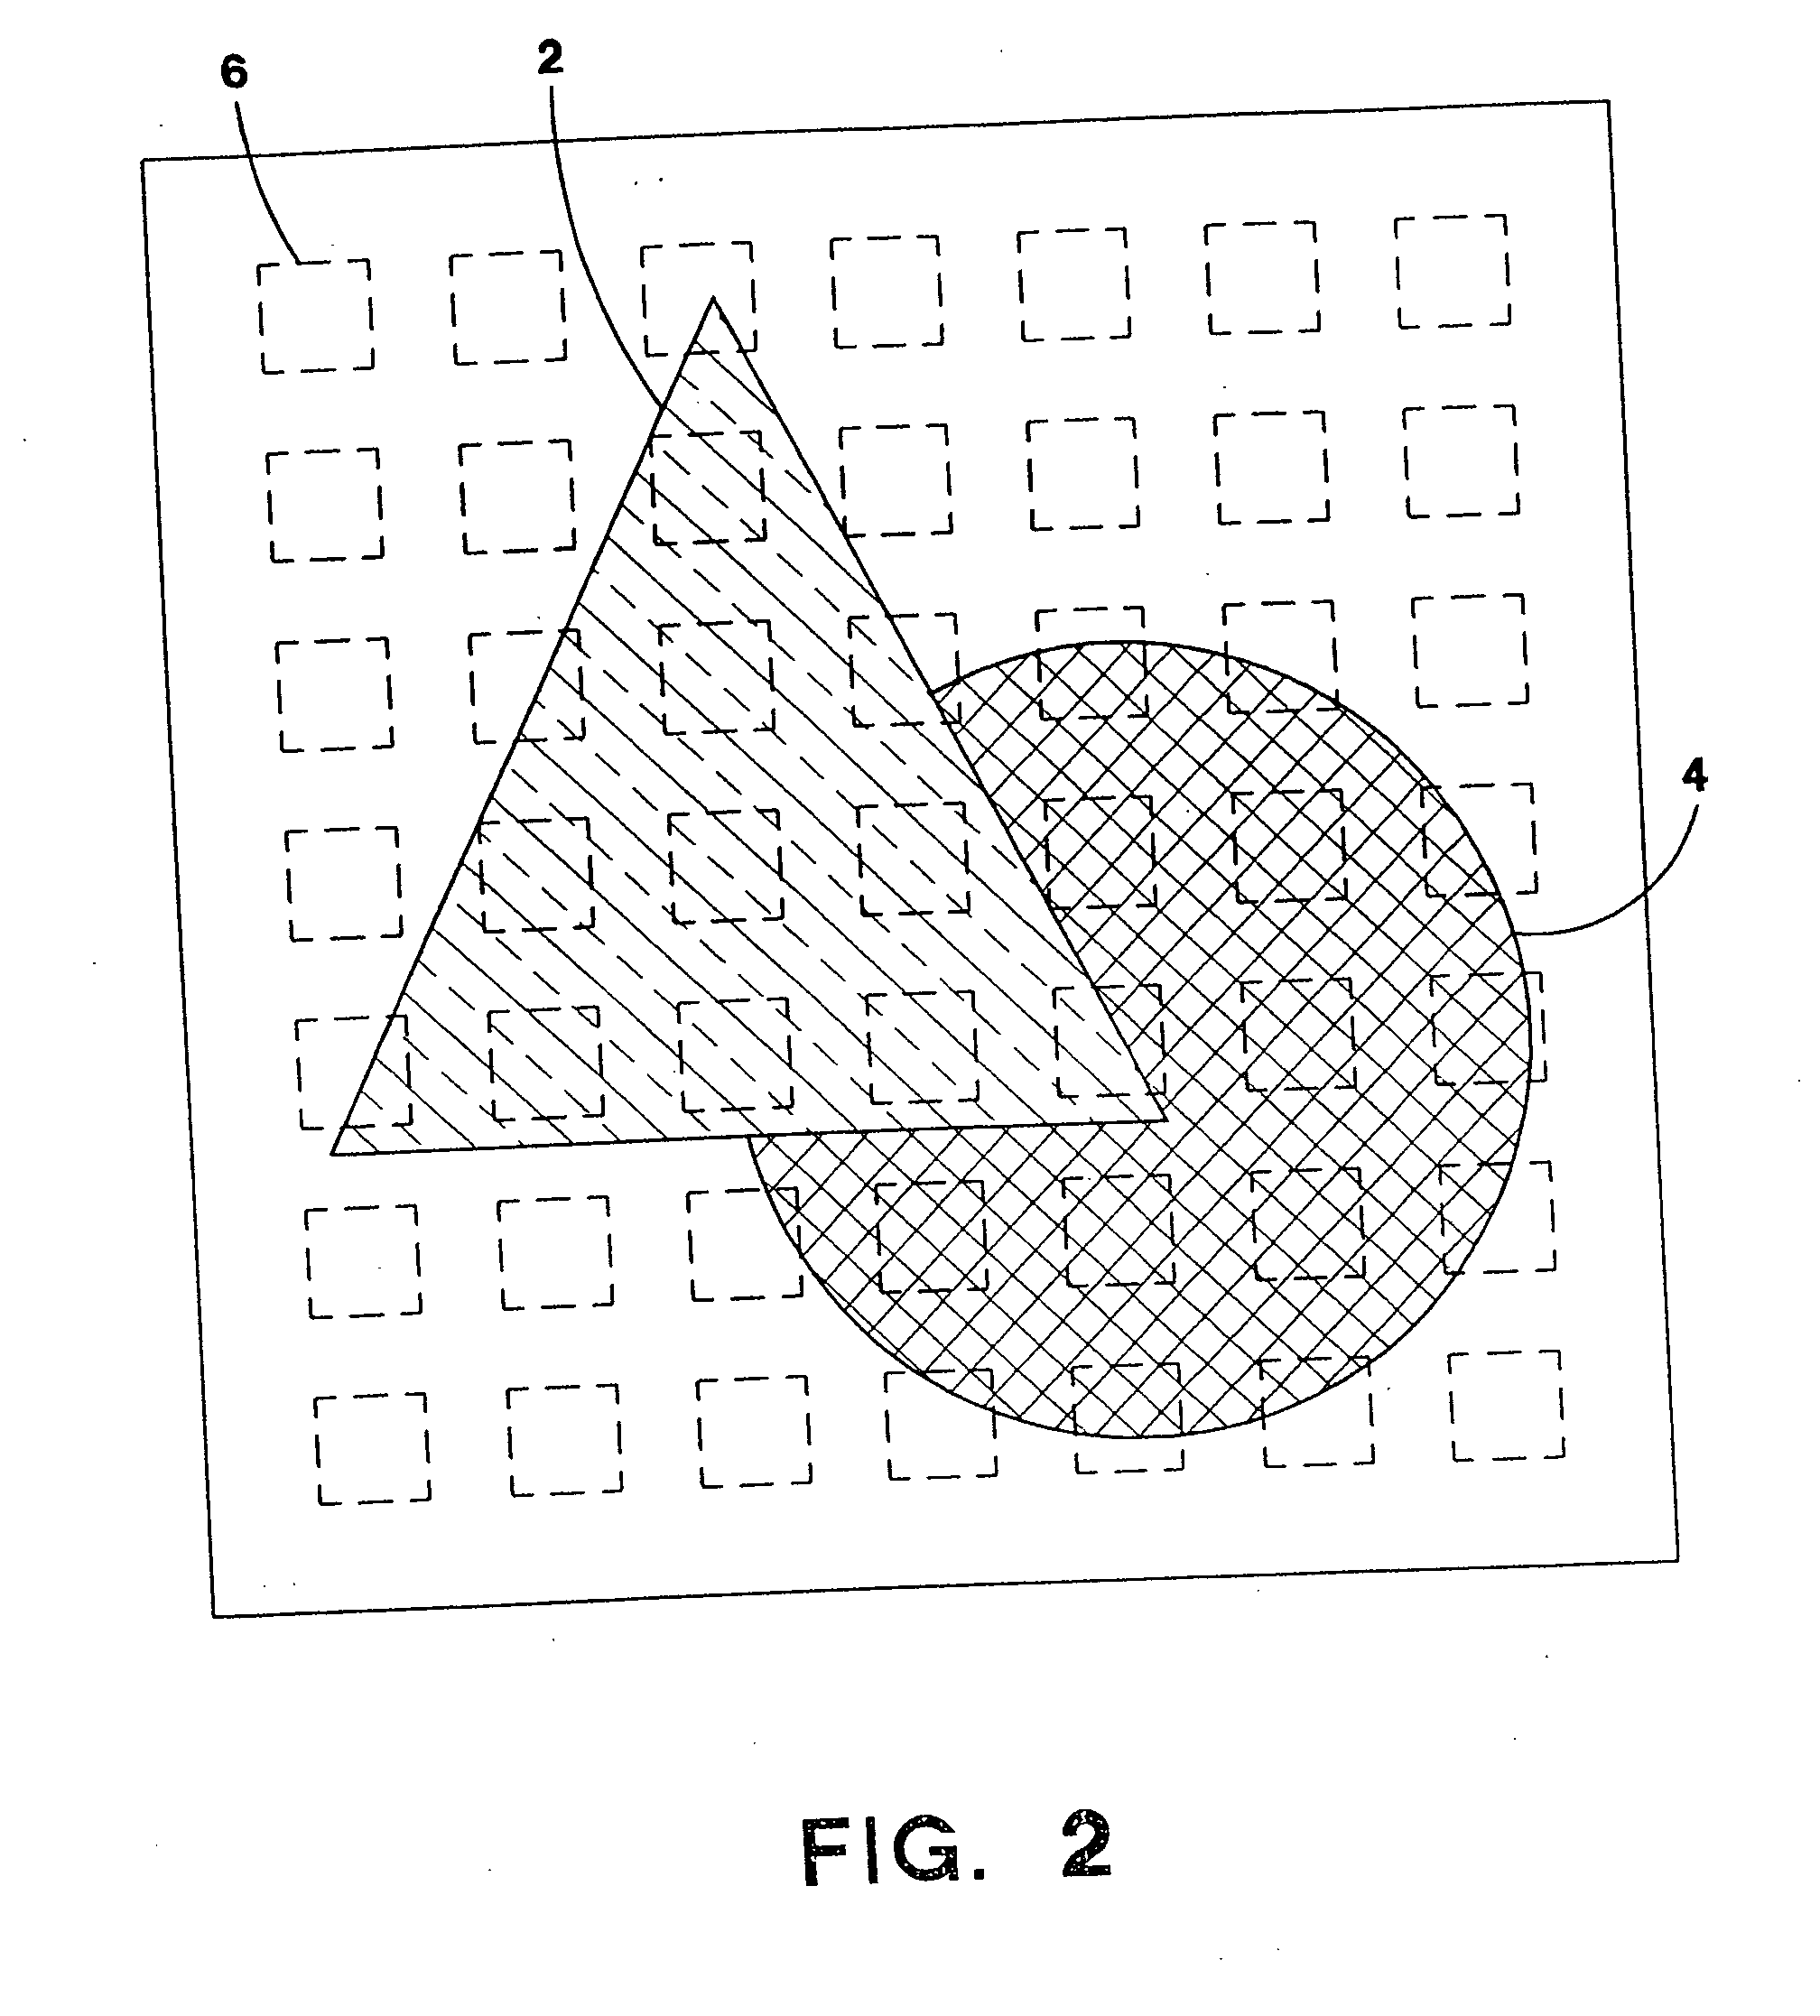 Method for image characterization using color and texture statistics with embedded spatial information